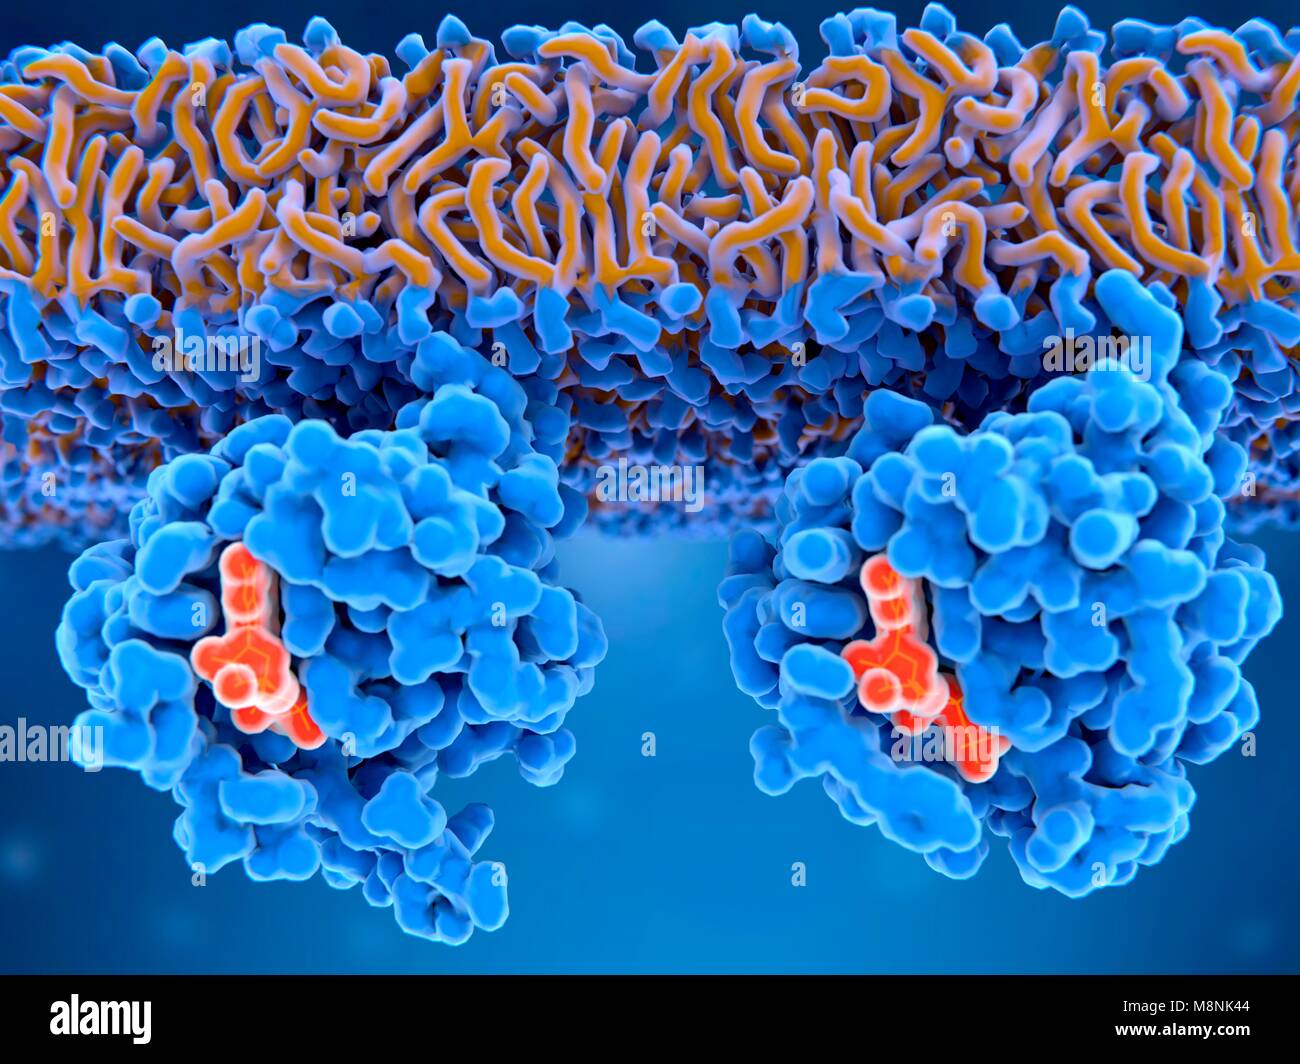 Inactive (left) and active (right) Ras proteins, illustration. Inactive Ras proteins have GDP (guanine diphosphate, orange) bound to their active site, while active Ras proteins have GTP (guanine triphosphate, orange) bound to their active site. Ras proteins are involved in transmitting signals within cells, turning on genes involved in cell growth, differentiation and survival. Mutations in ras genes can lead to permanently activated proteins causing cells to subdivide without control, often leading to cancer. Stock Photo